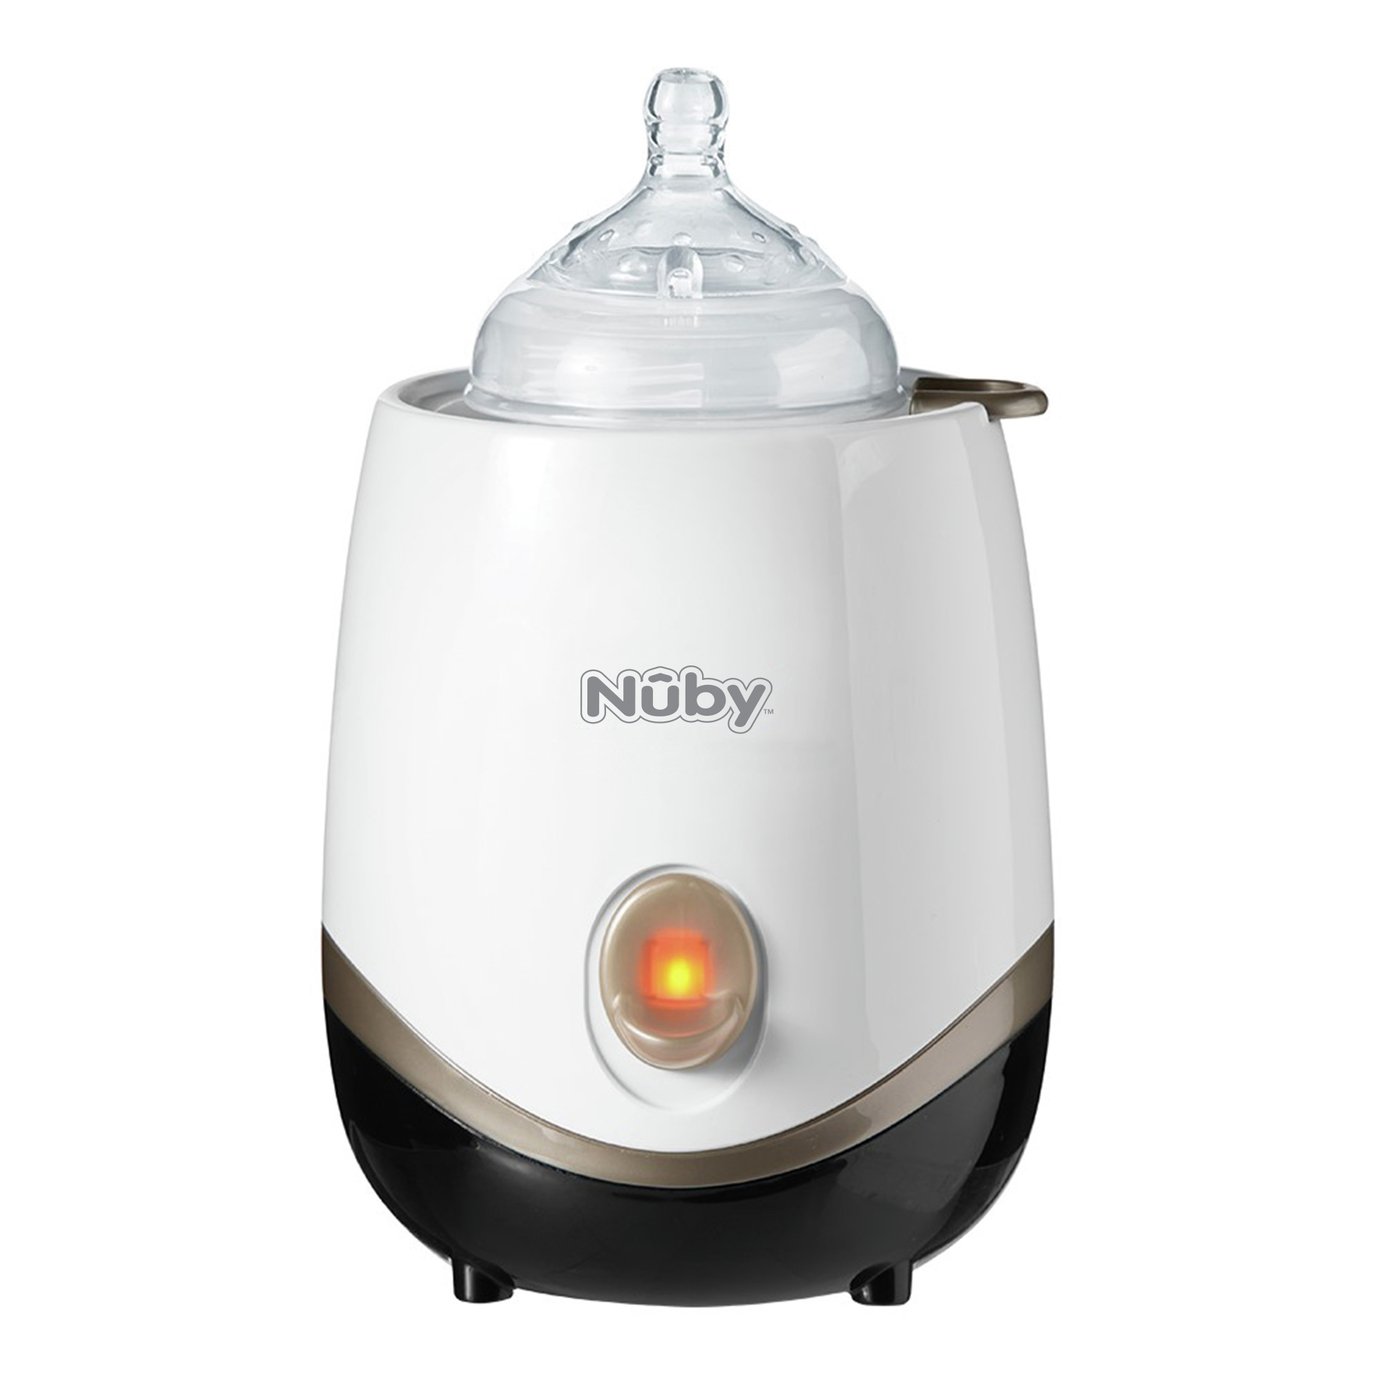 Nuby Electric Baby Bottle and Food Warmer Review